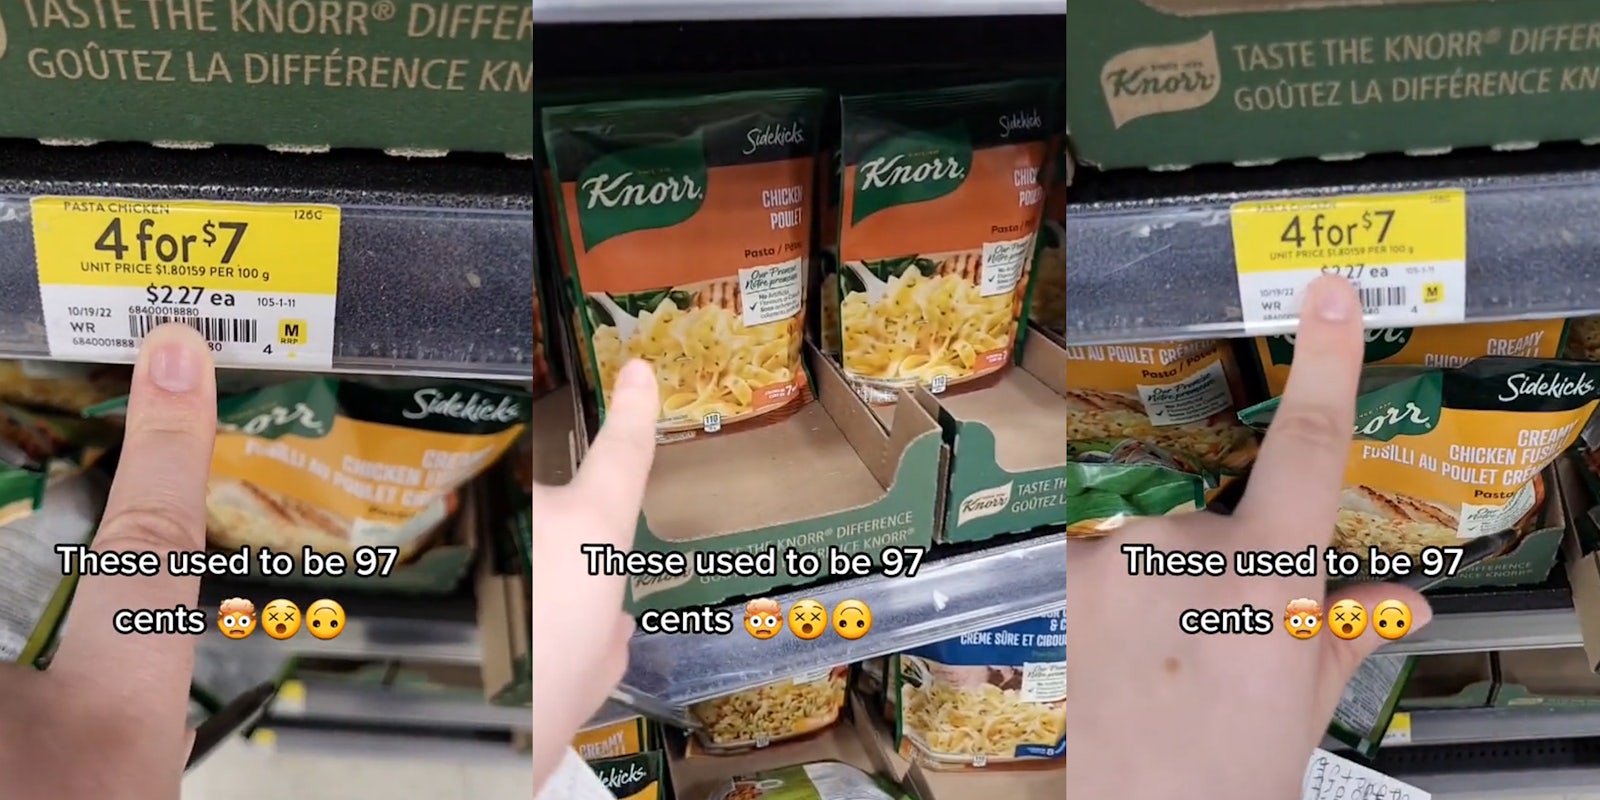 Knorr Sidekicks in store with price tag and caption 'These used to be 97 cents' (l) Knorr Sidekicks in store with caption 'These used to be 97 cents' (c) Knorr Sidekicks in store with price tag and caption 'These used to be 97 cents' (r)